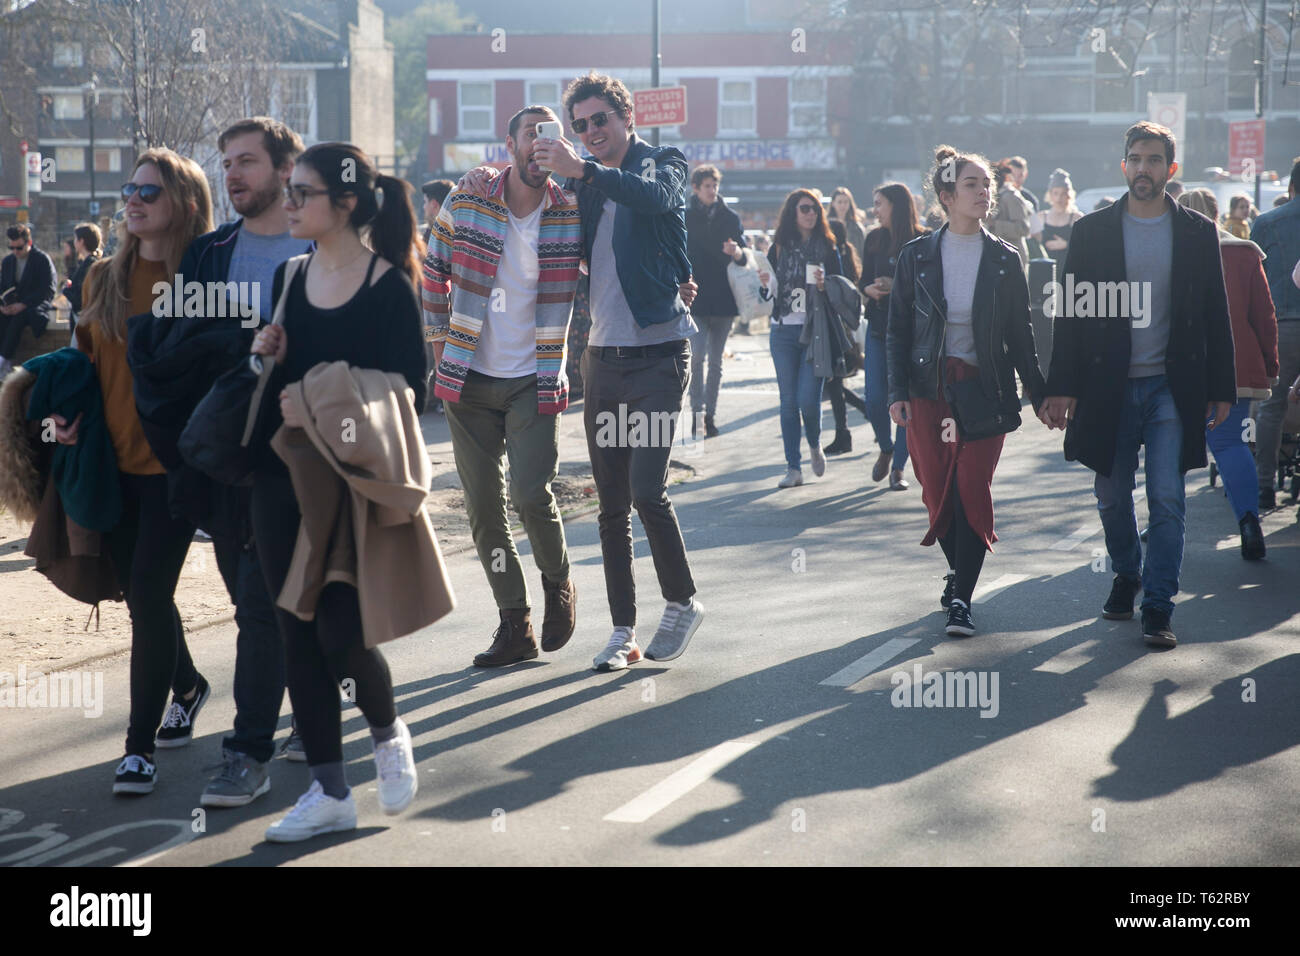 LONDON, UK - APRIL 17, 2019 People at the East London . Men take a selfie using the phone Stock Photo